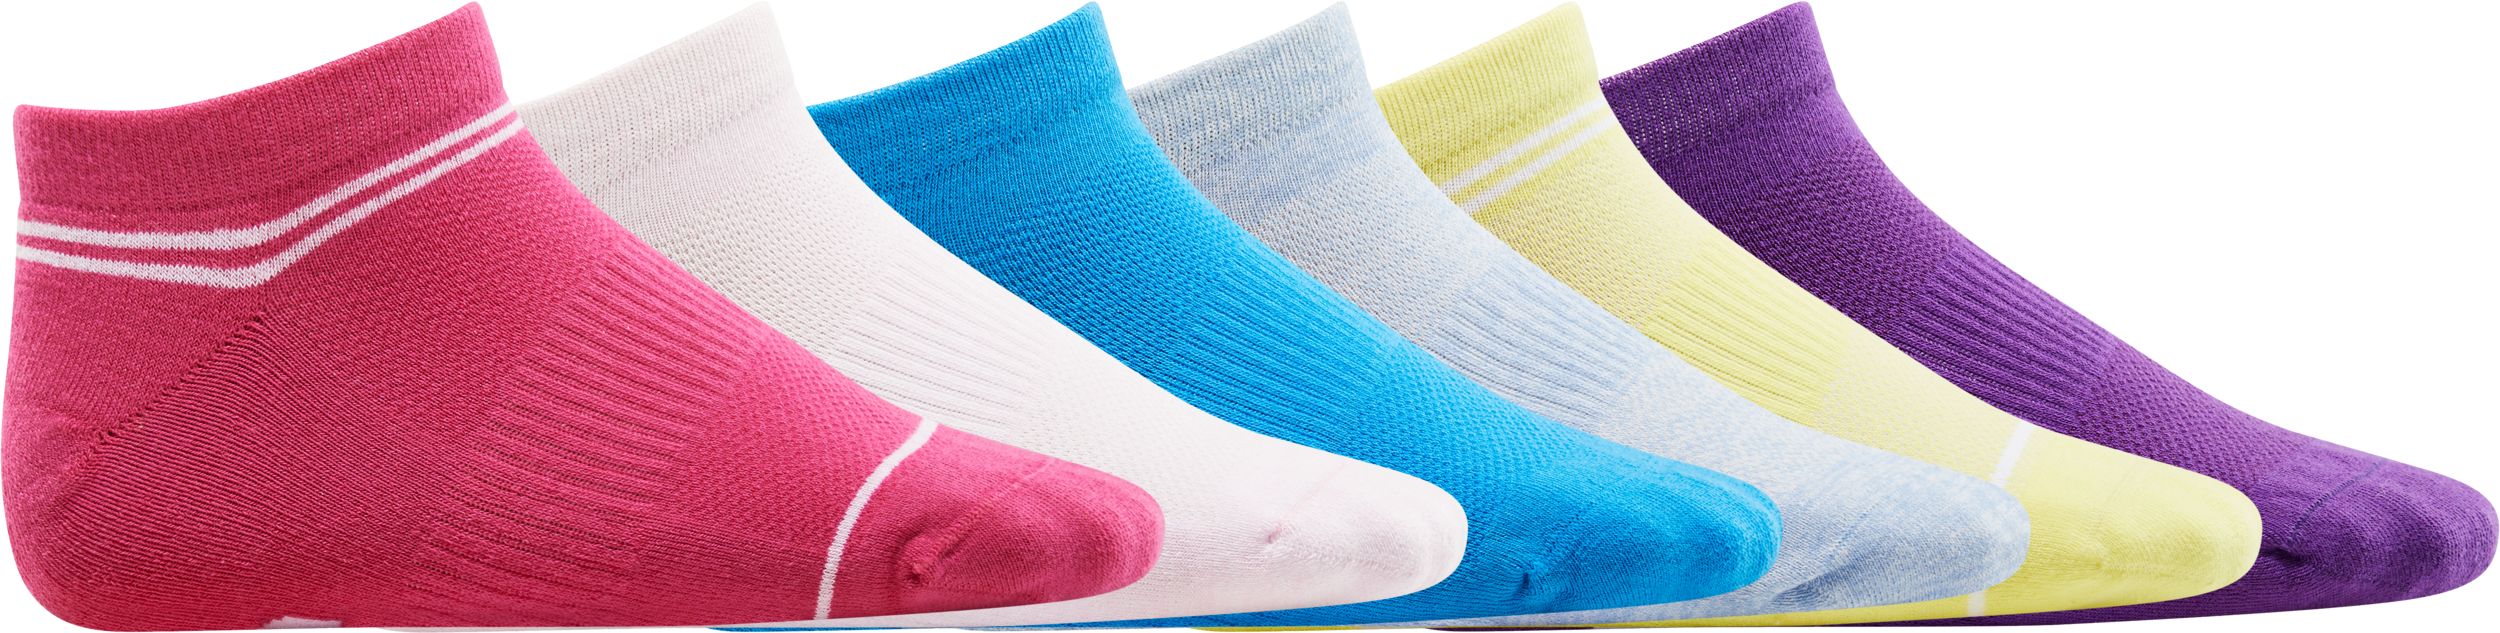 Image of FWD Girls' Athletic No Show Socks - 6 Pack